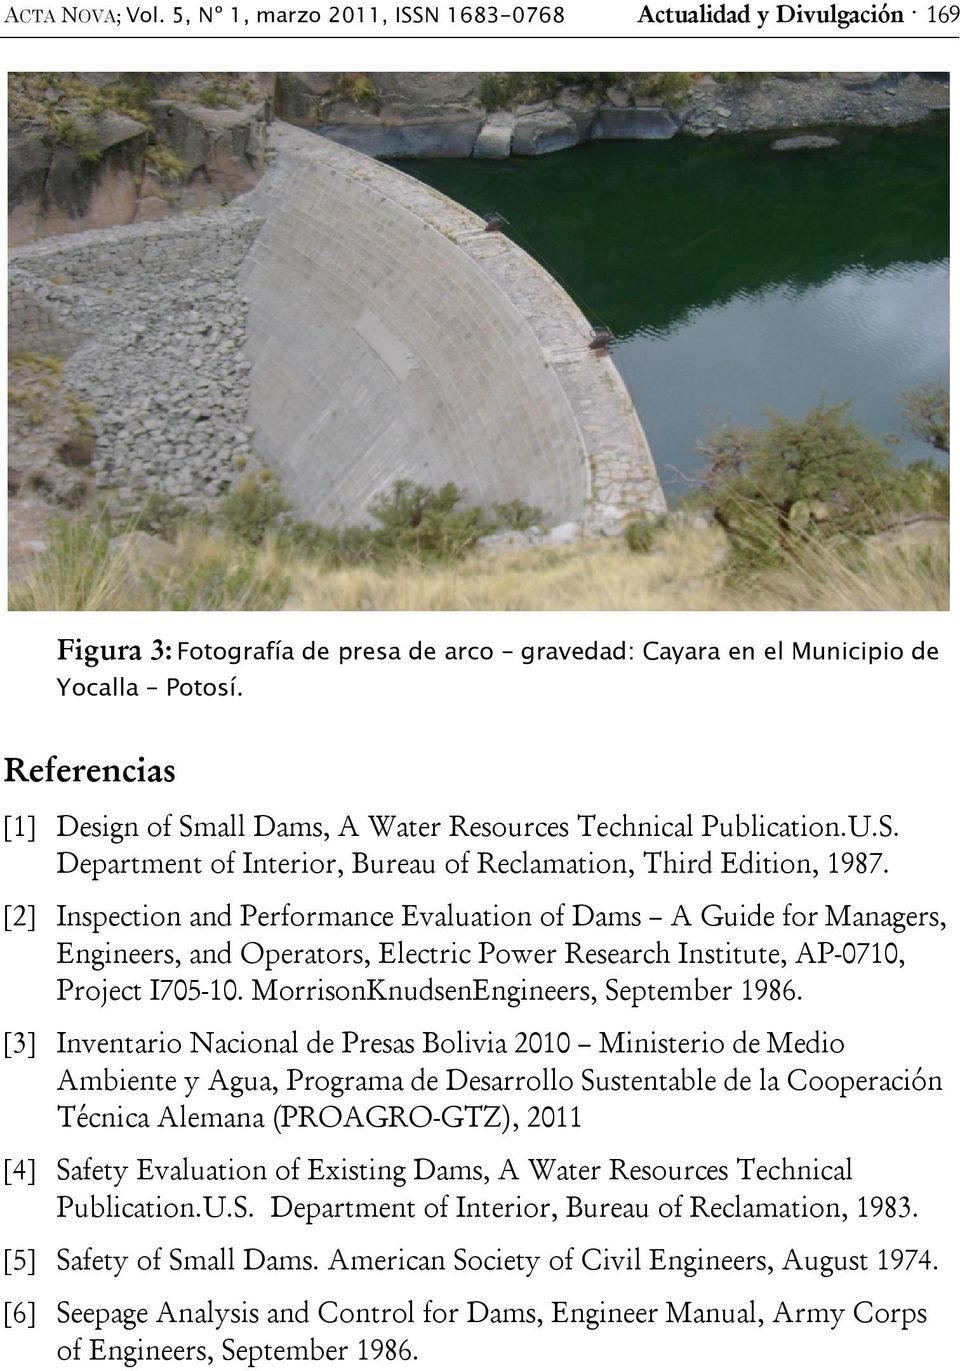 [2] Inspection and Performance Evaluation of Dams A Guide for Managers, Engineers, and Operators, Electric Power Research Institute, AP-0710, Project I705-10. MorrisonKnudsenEngineers, September 1986.